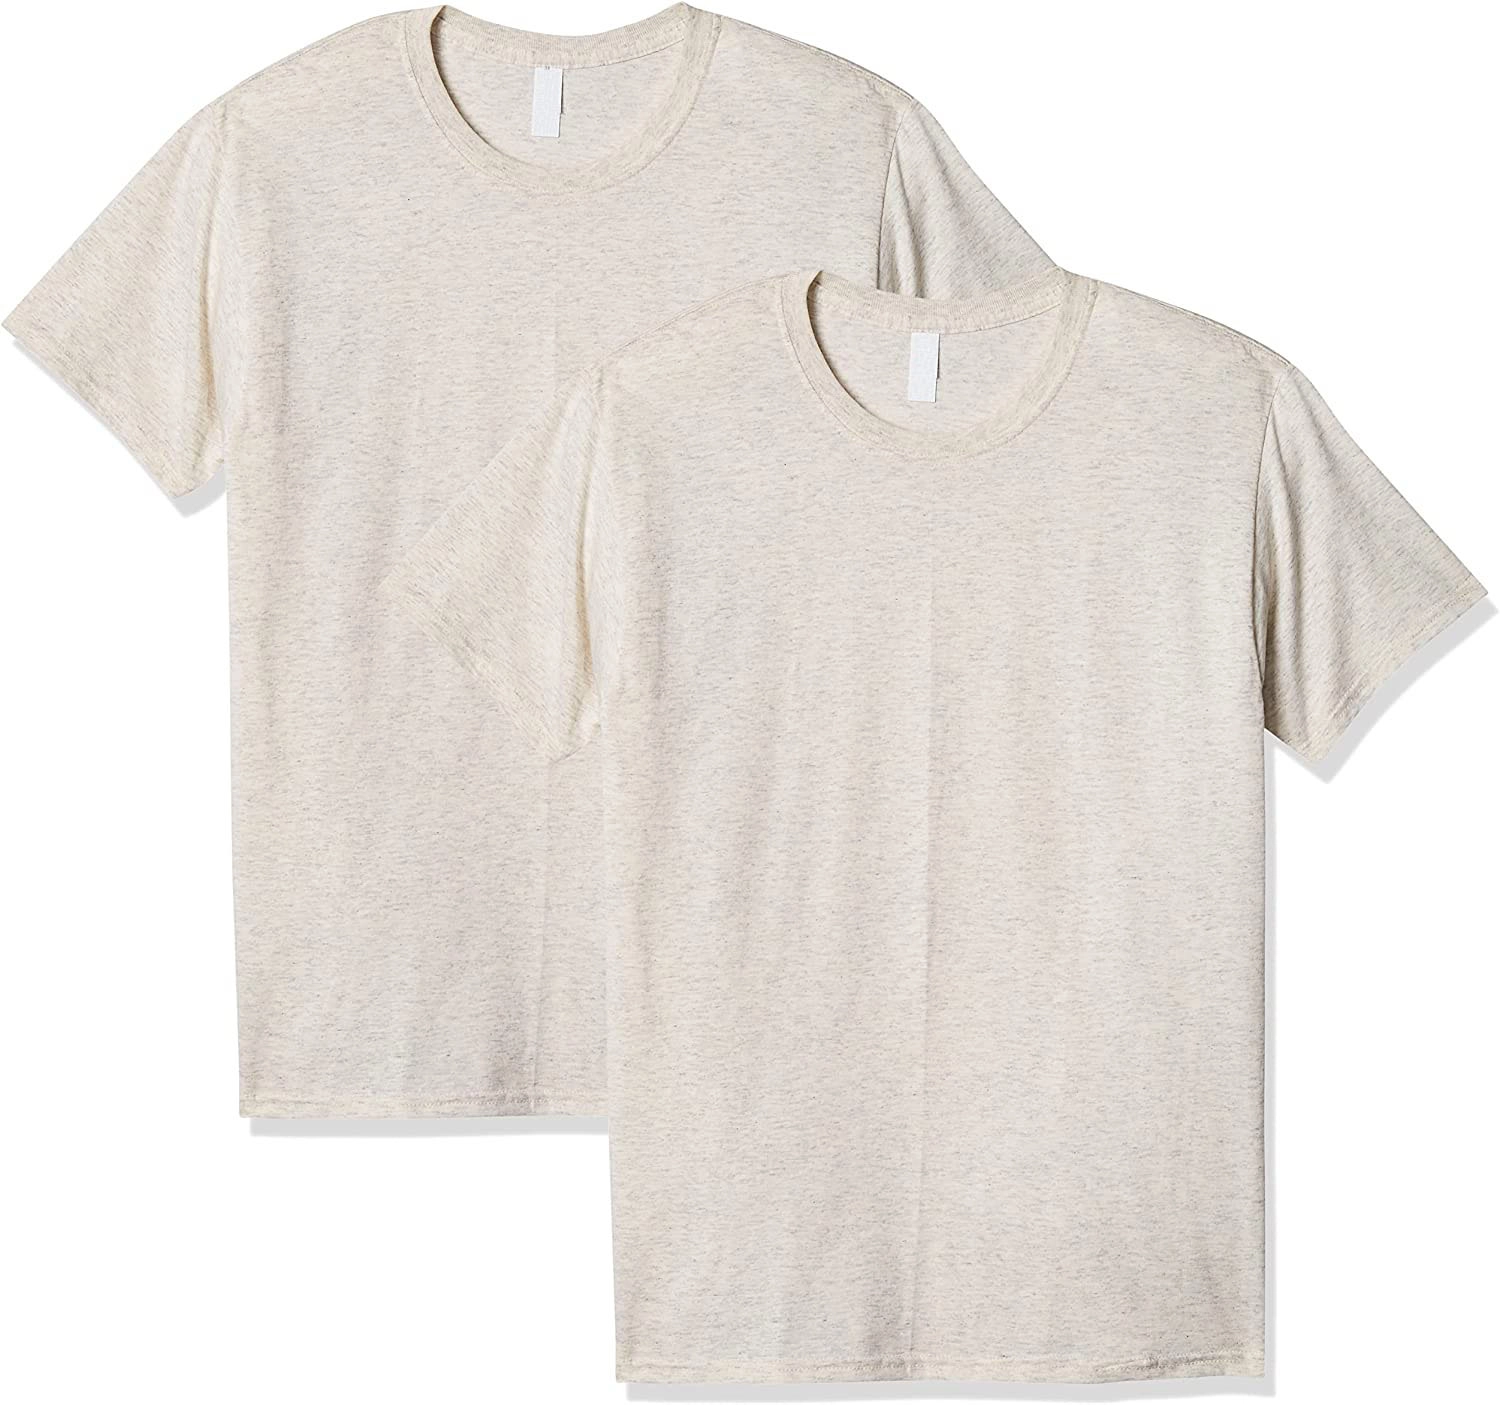 eco friendly blank t-shirts - Bangladesh Factory, Suppliers, Manufacturers